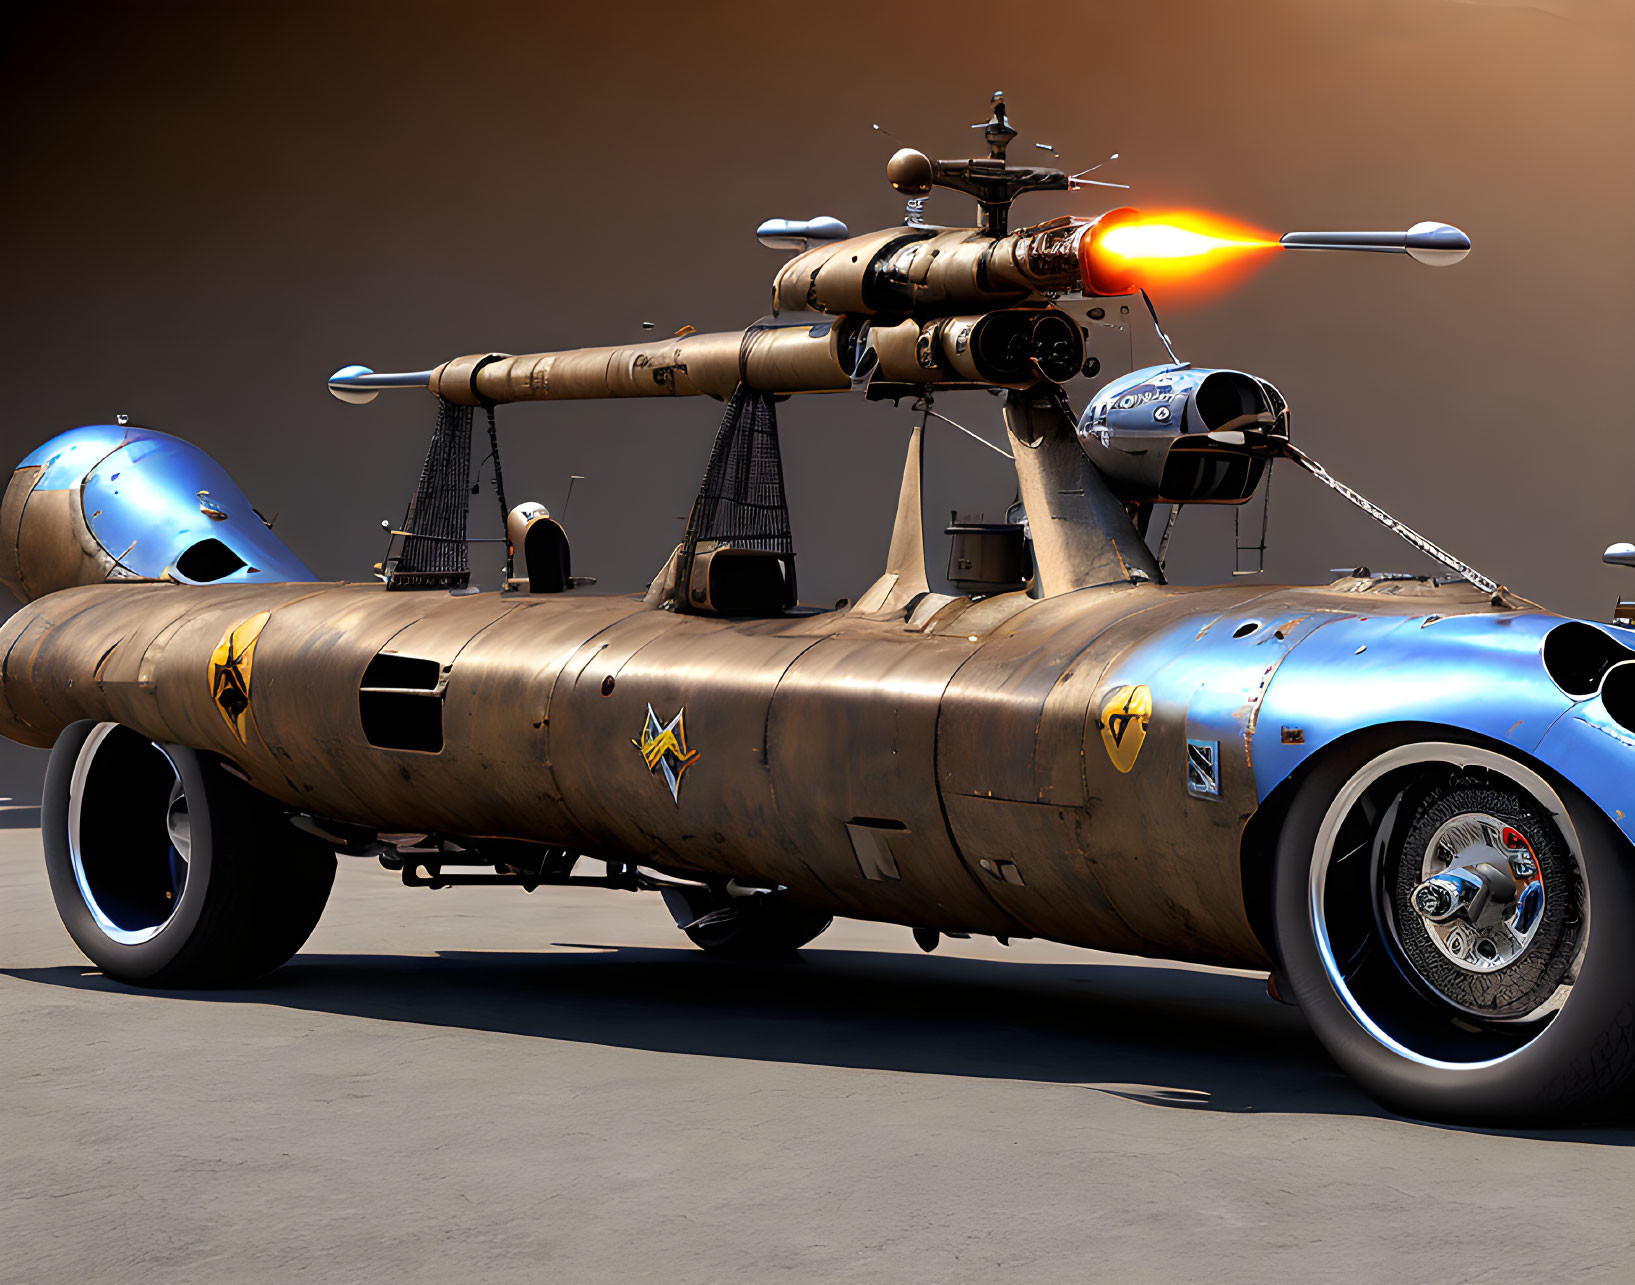 Fantastical submarine car hybrid with periscopes and flames in desert setting